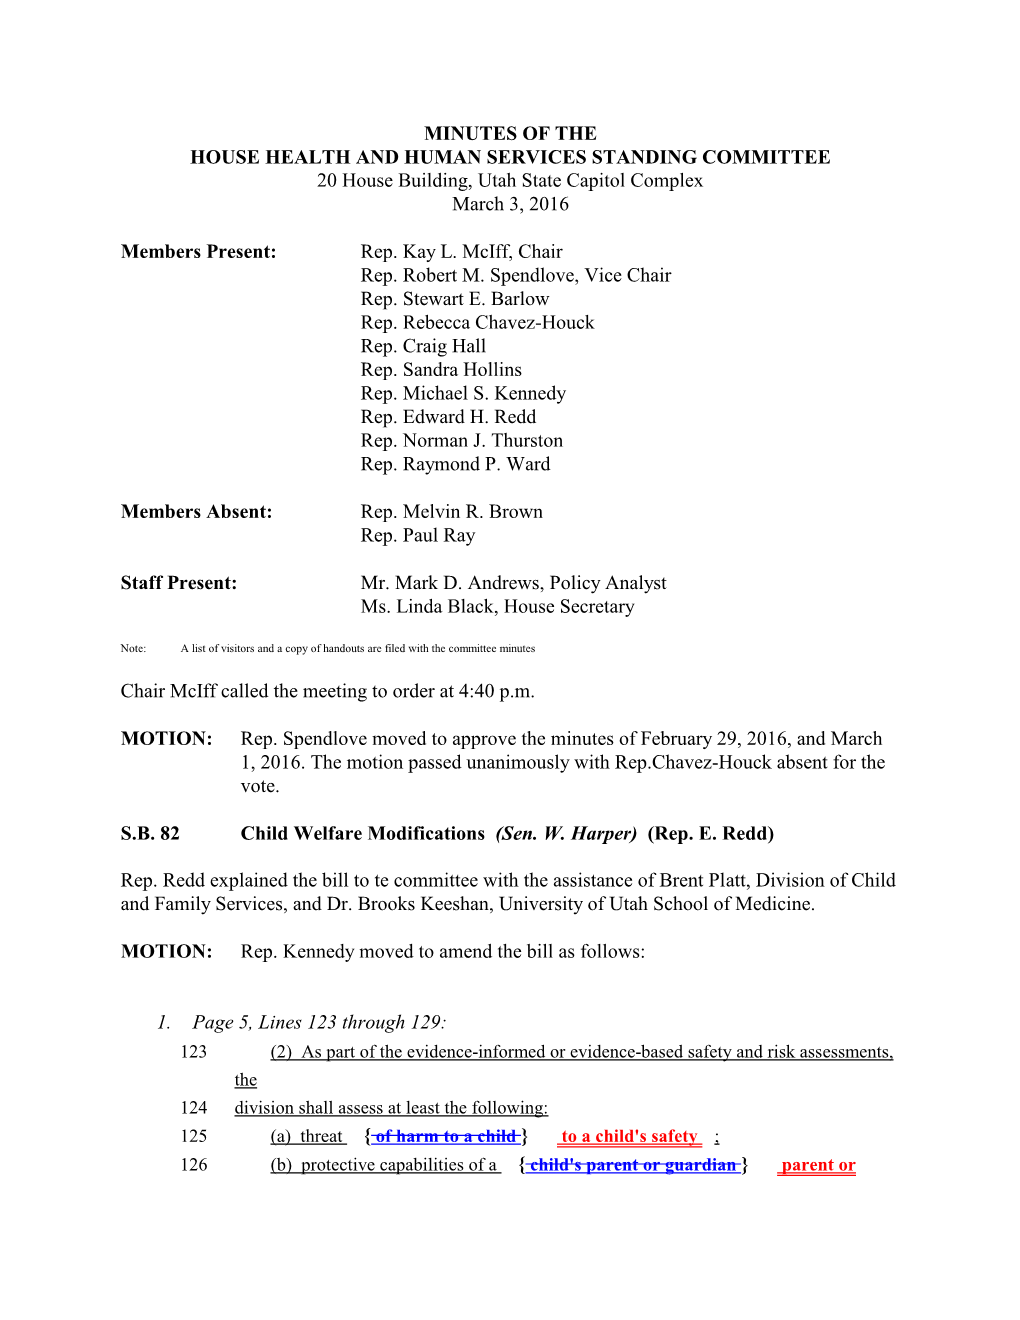 Minutes for House Health and Human Services Committee 03/03